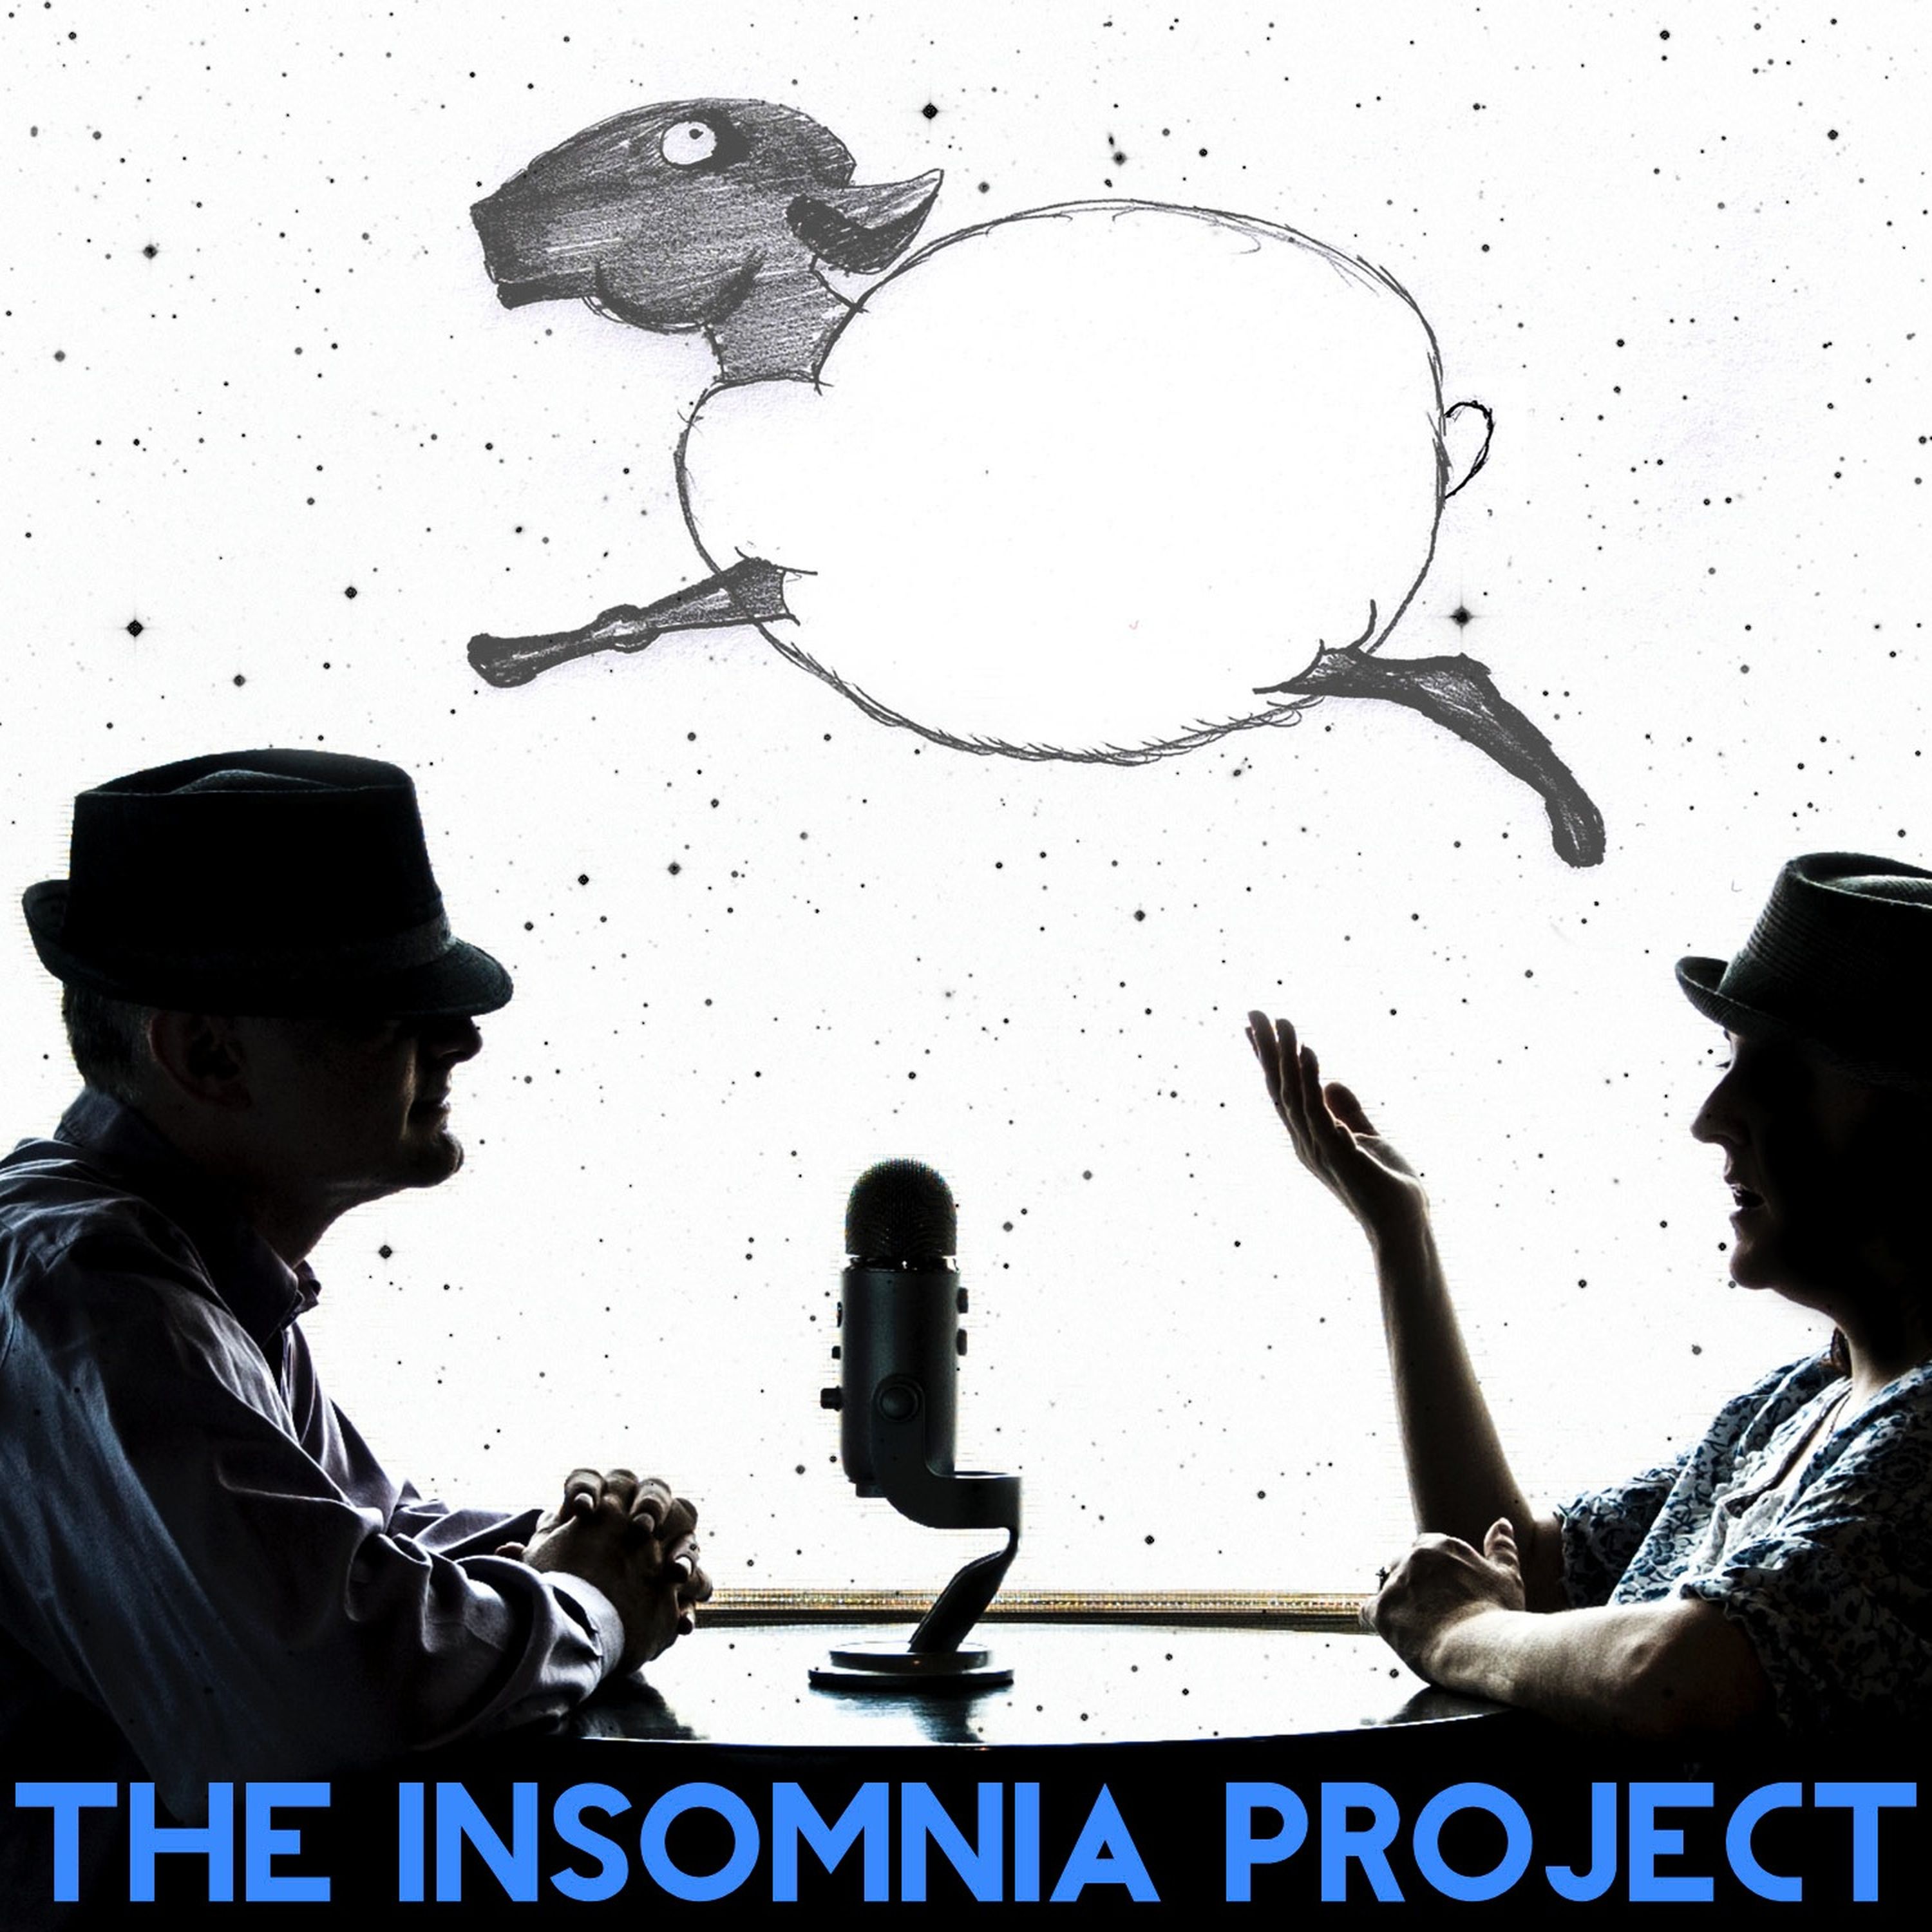 The History Of The Insomnia Project